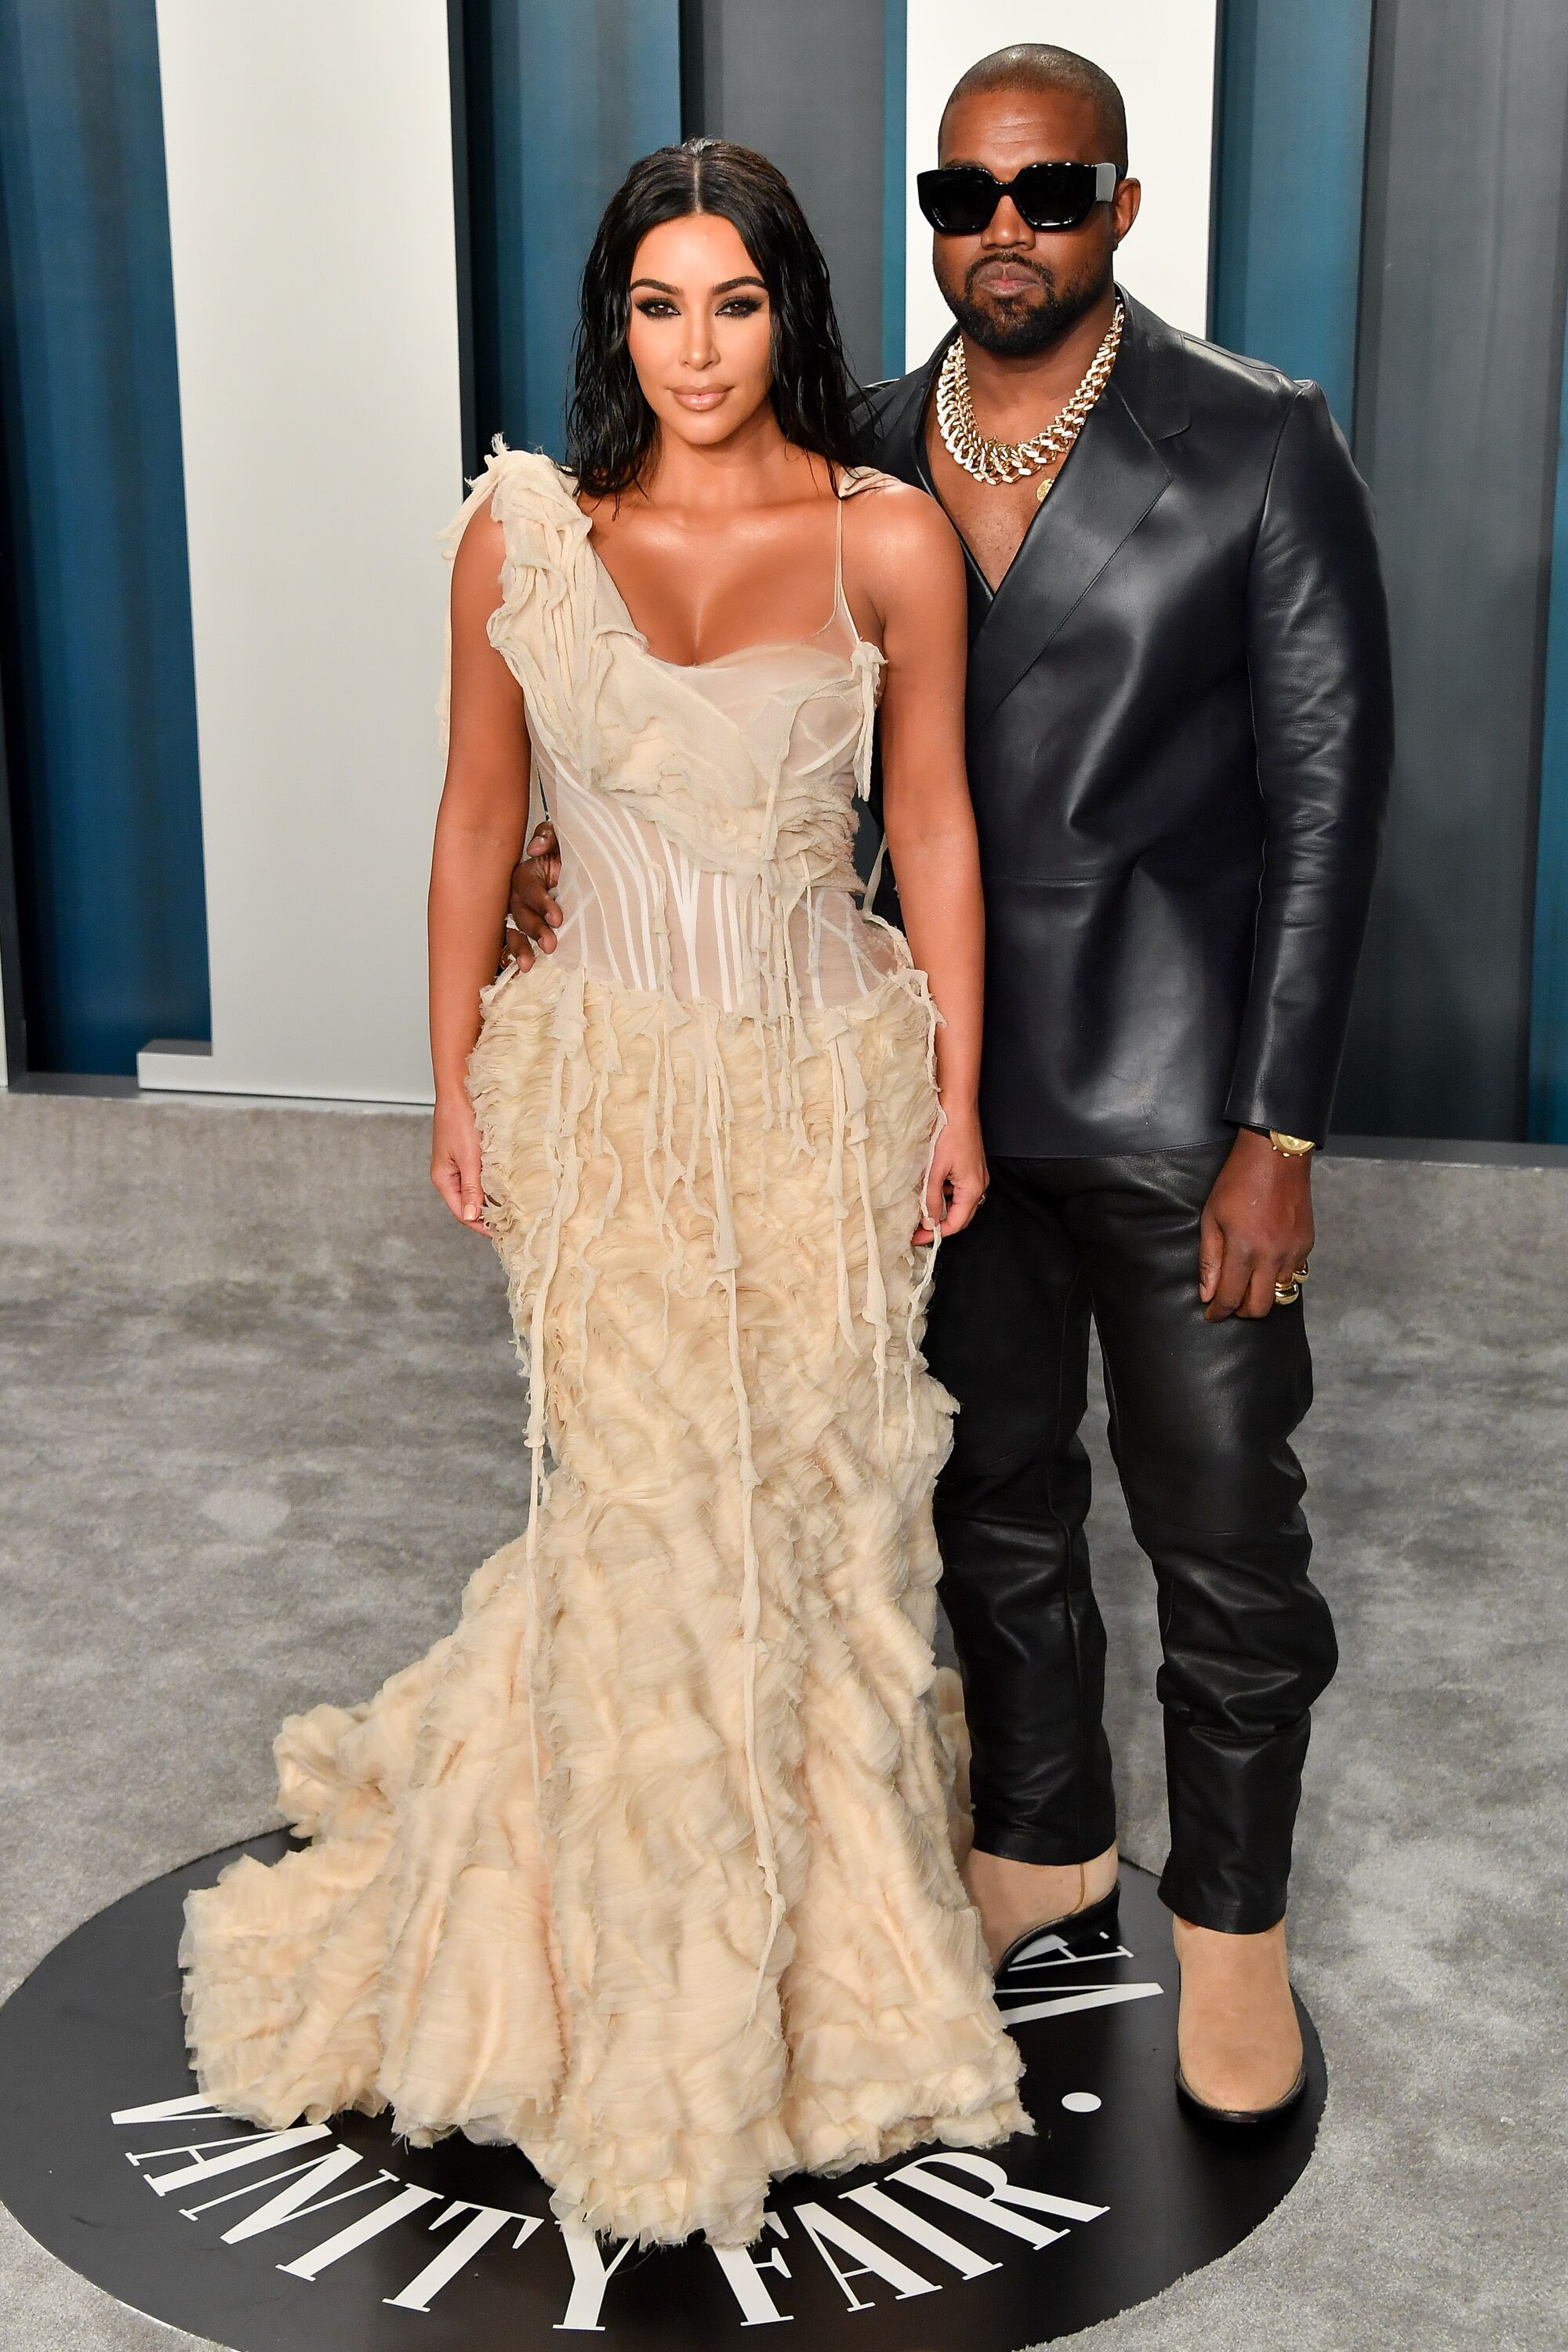 Kim Kardashian and Kanye West at the Vanity Fair Oscar Party hosted by Radhika Jones on February 09, 2020, in Beverly Hills, California Photo Allen Berezovsky/Getty Images